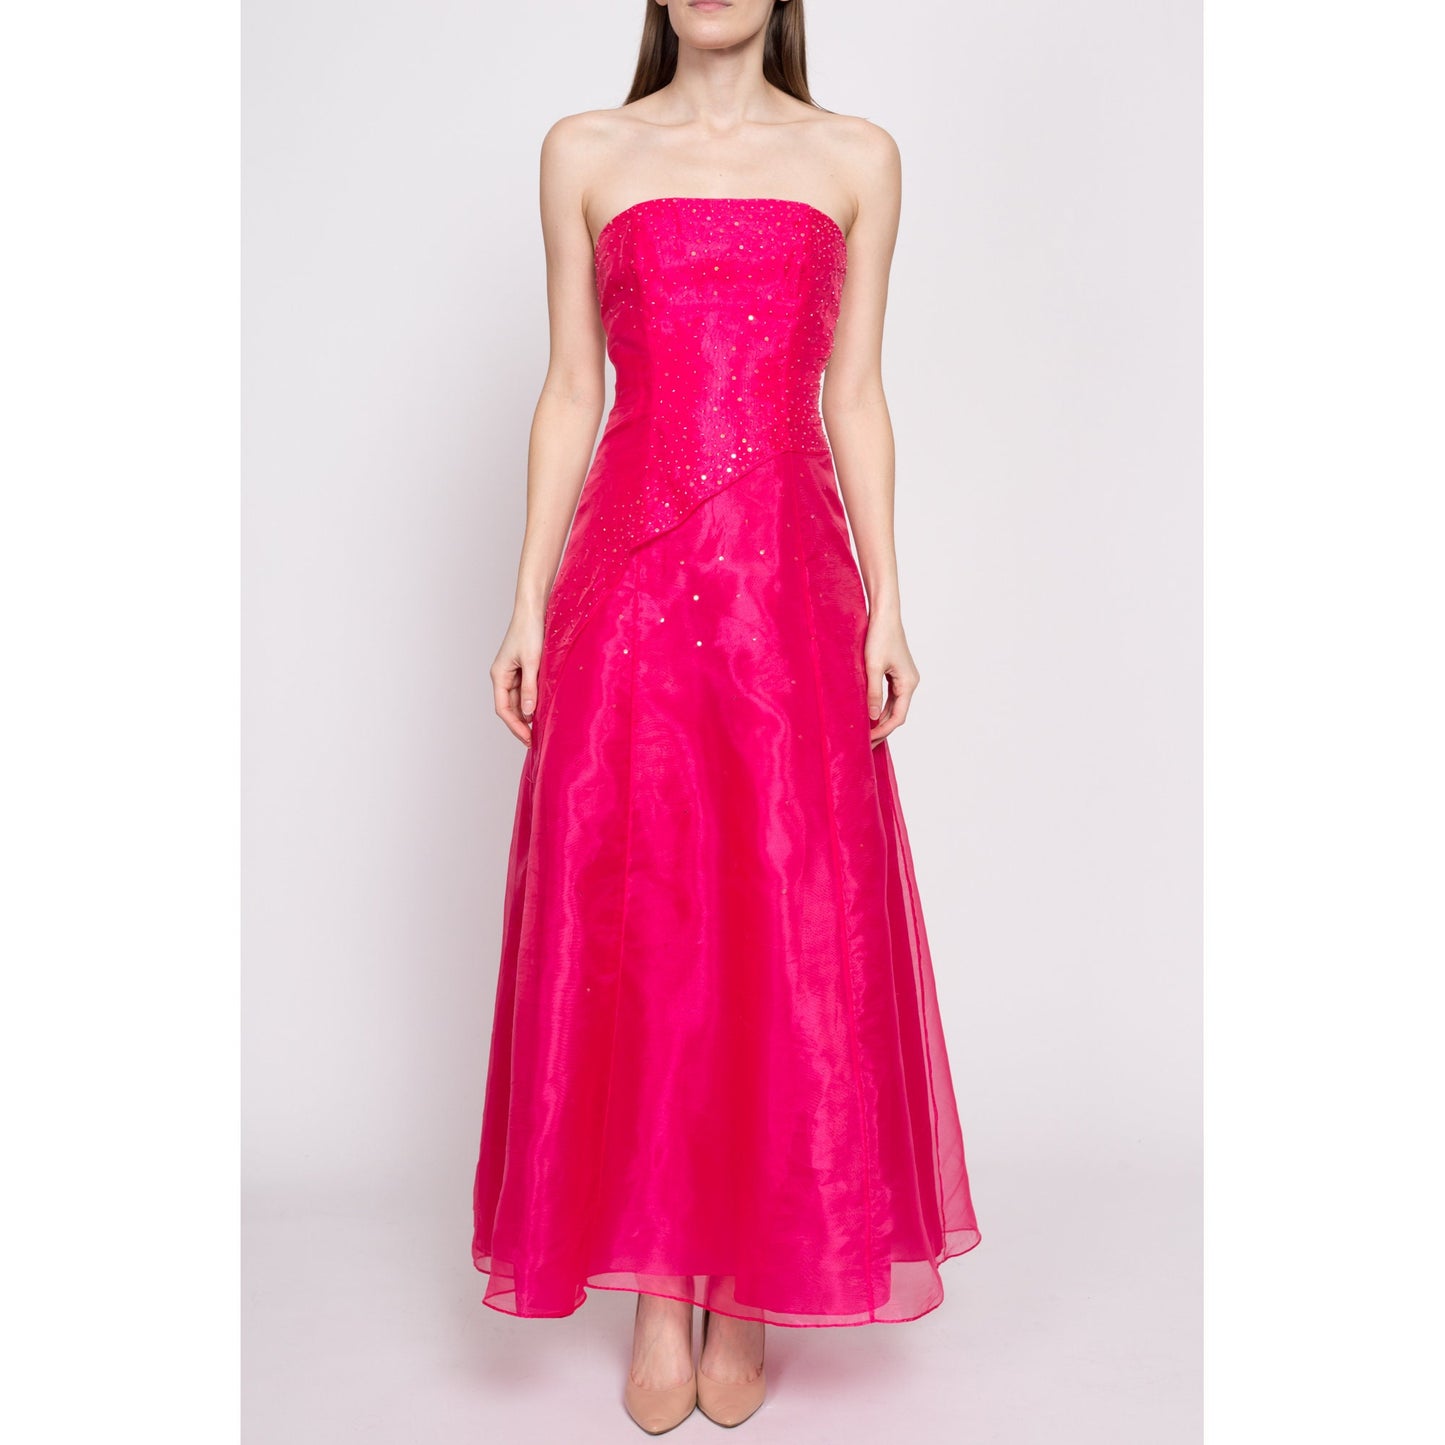 90s Hot Pink Backless Gown - Small | Vintage Sleeveless Strappy Low Back Sequin Formal Maxi Prom Dress